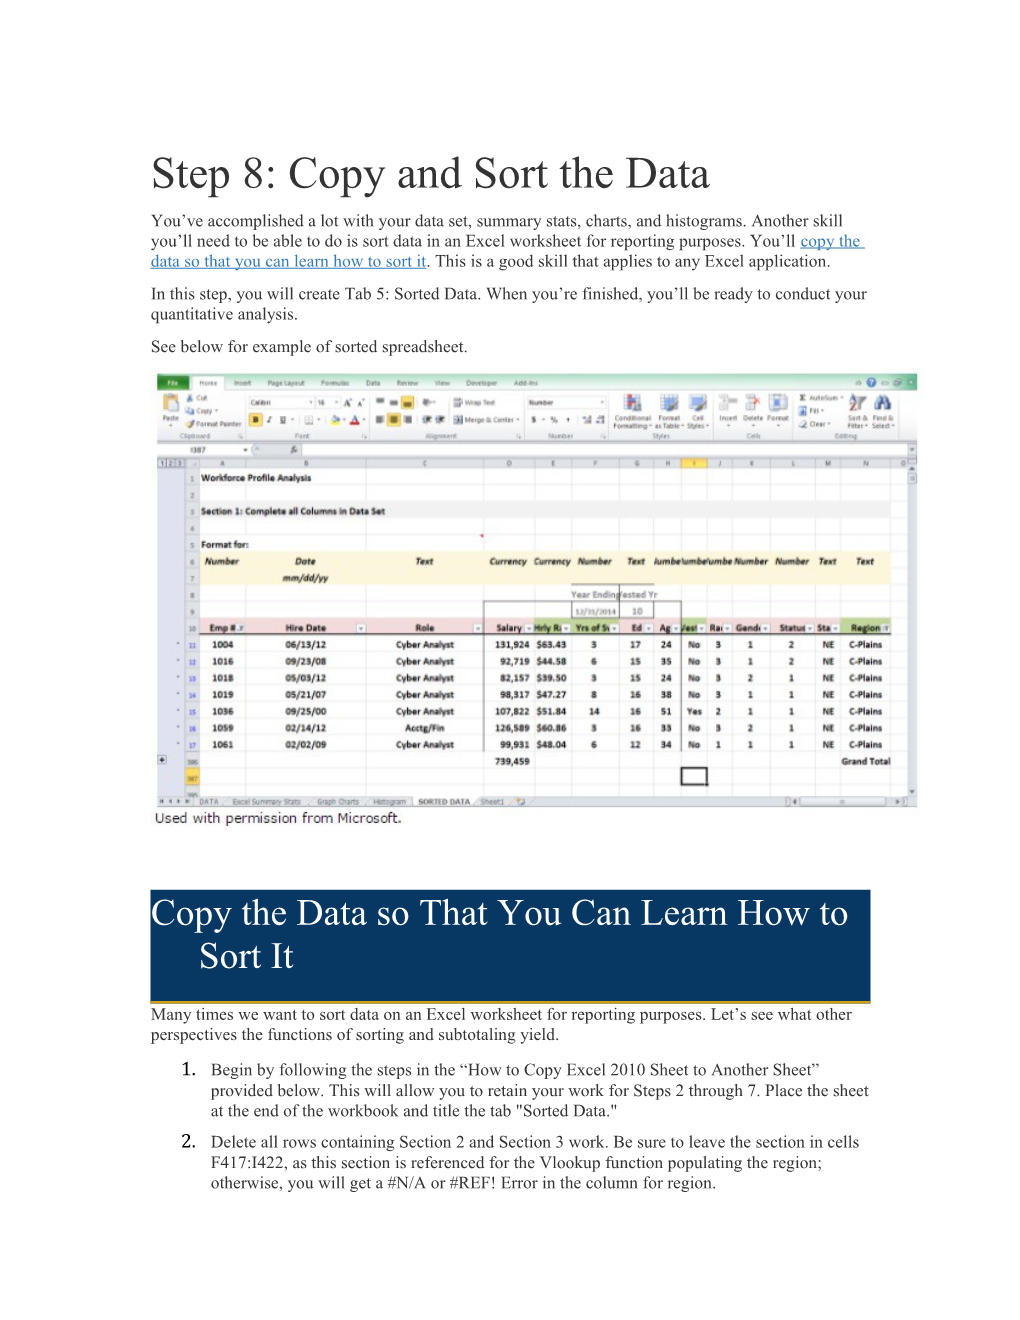 Step 8: Copy and Sort the Data